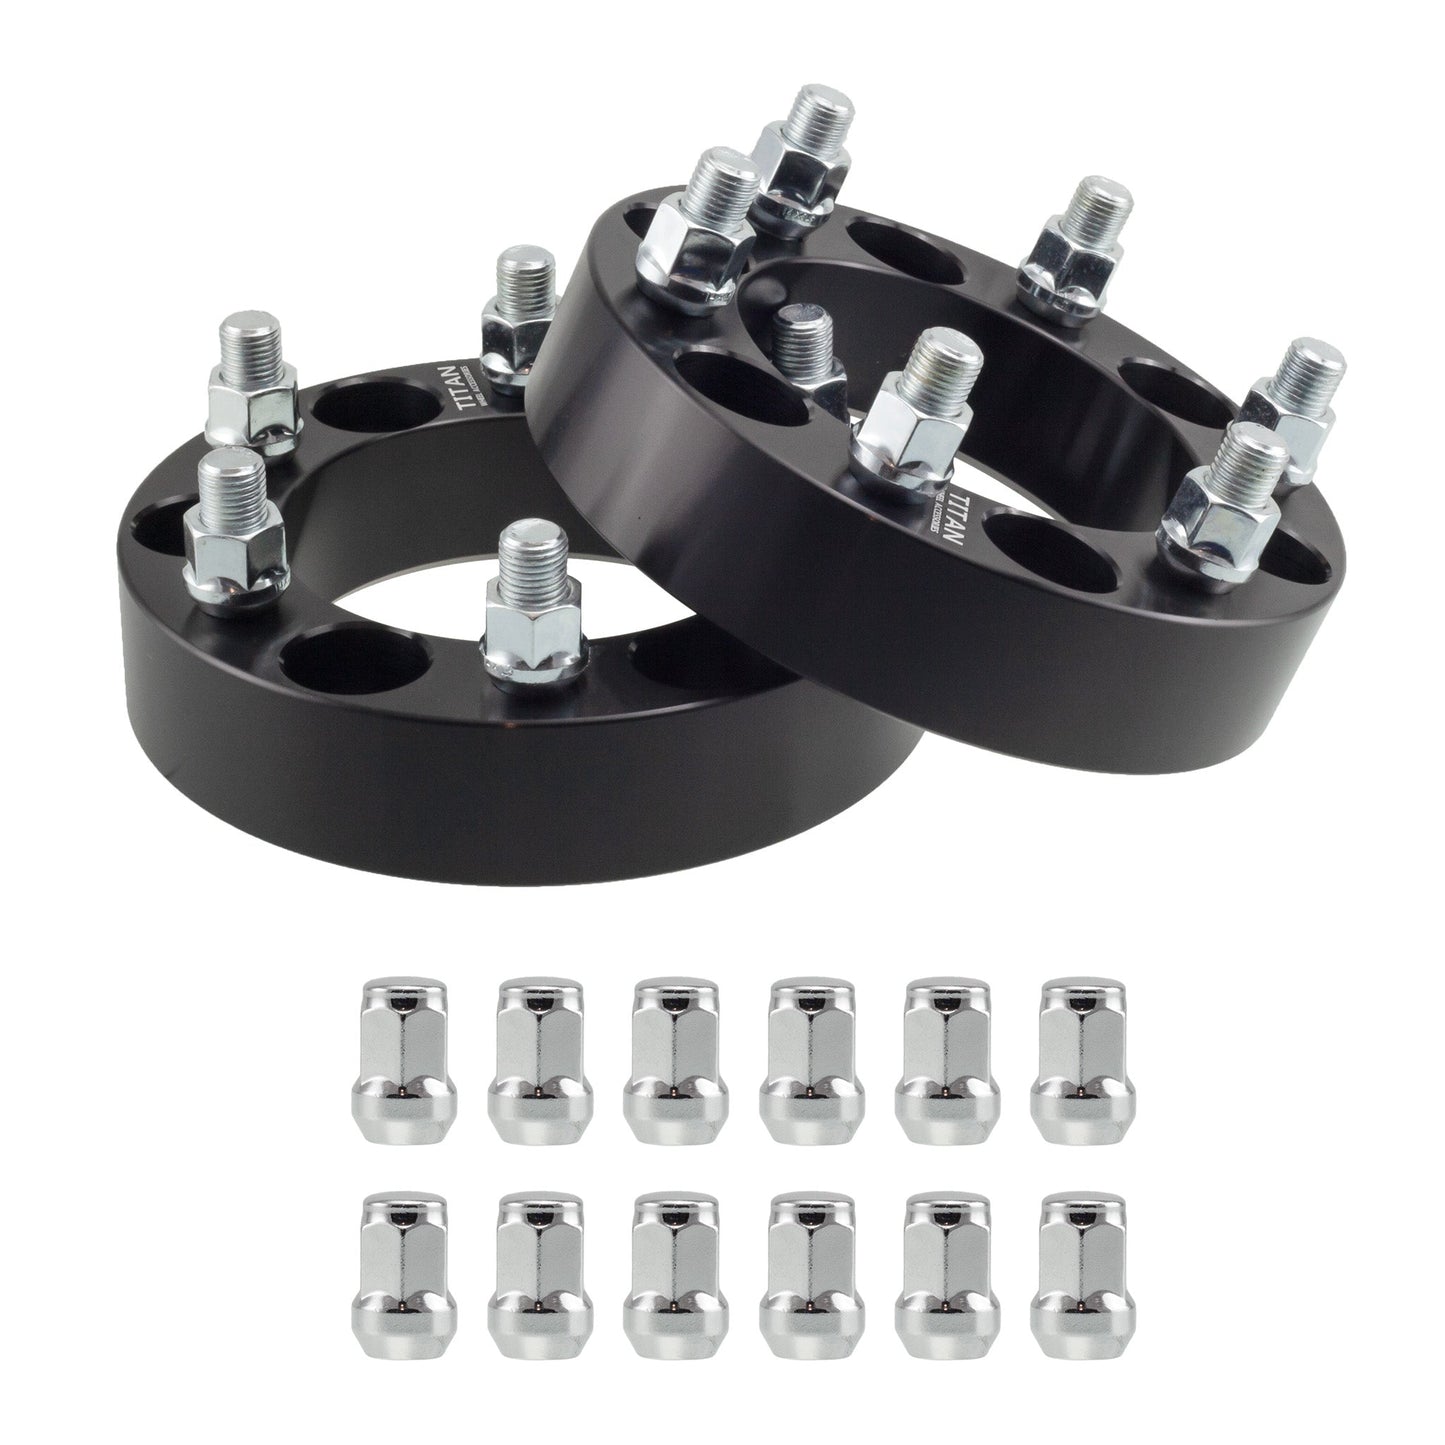 2" (50mm) Titan Wheel Spacers for Ford Bronco 2021-2022 Ranger 2019+ | 6x5.5 (6x139.7) | 93.1 Hubcentric | 12x1.5 Studs | Titan Wheel Accessories